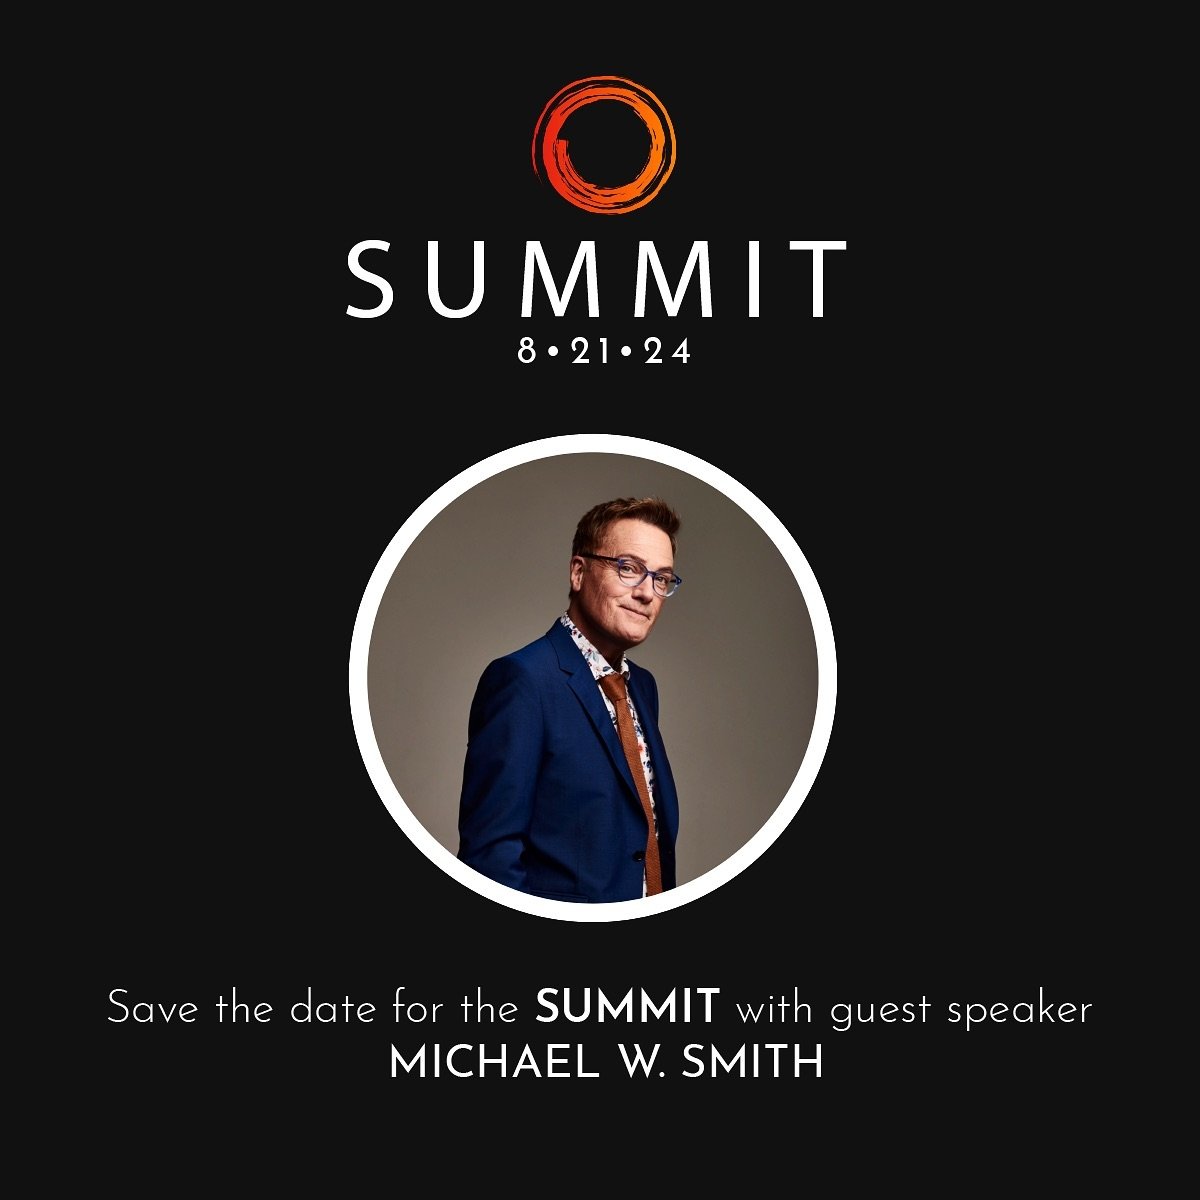 SAVE THE DATE for the SUMMIT // 8.21.24 
With guest speaker @mwsmithofficial 

Click the link in our bio to join the SUMMIT registration waitlist now and to be notified when registration opens!